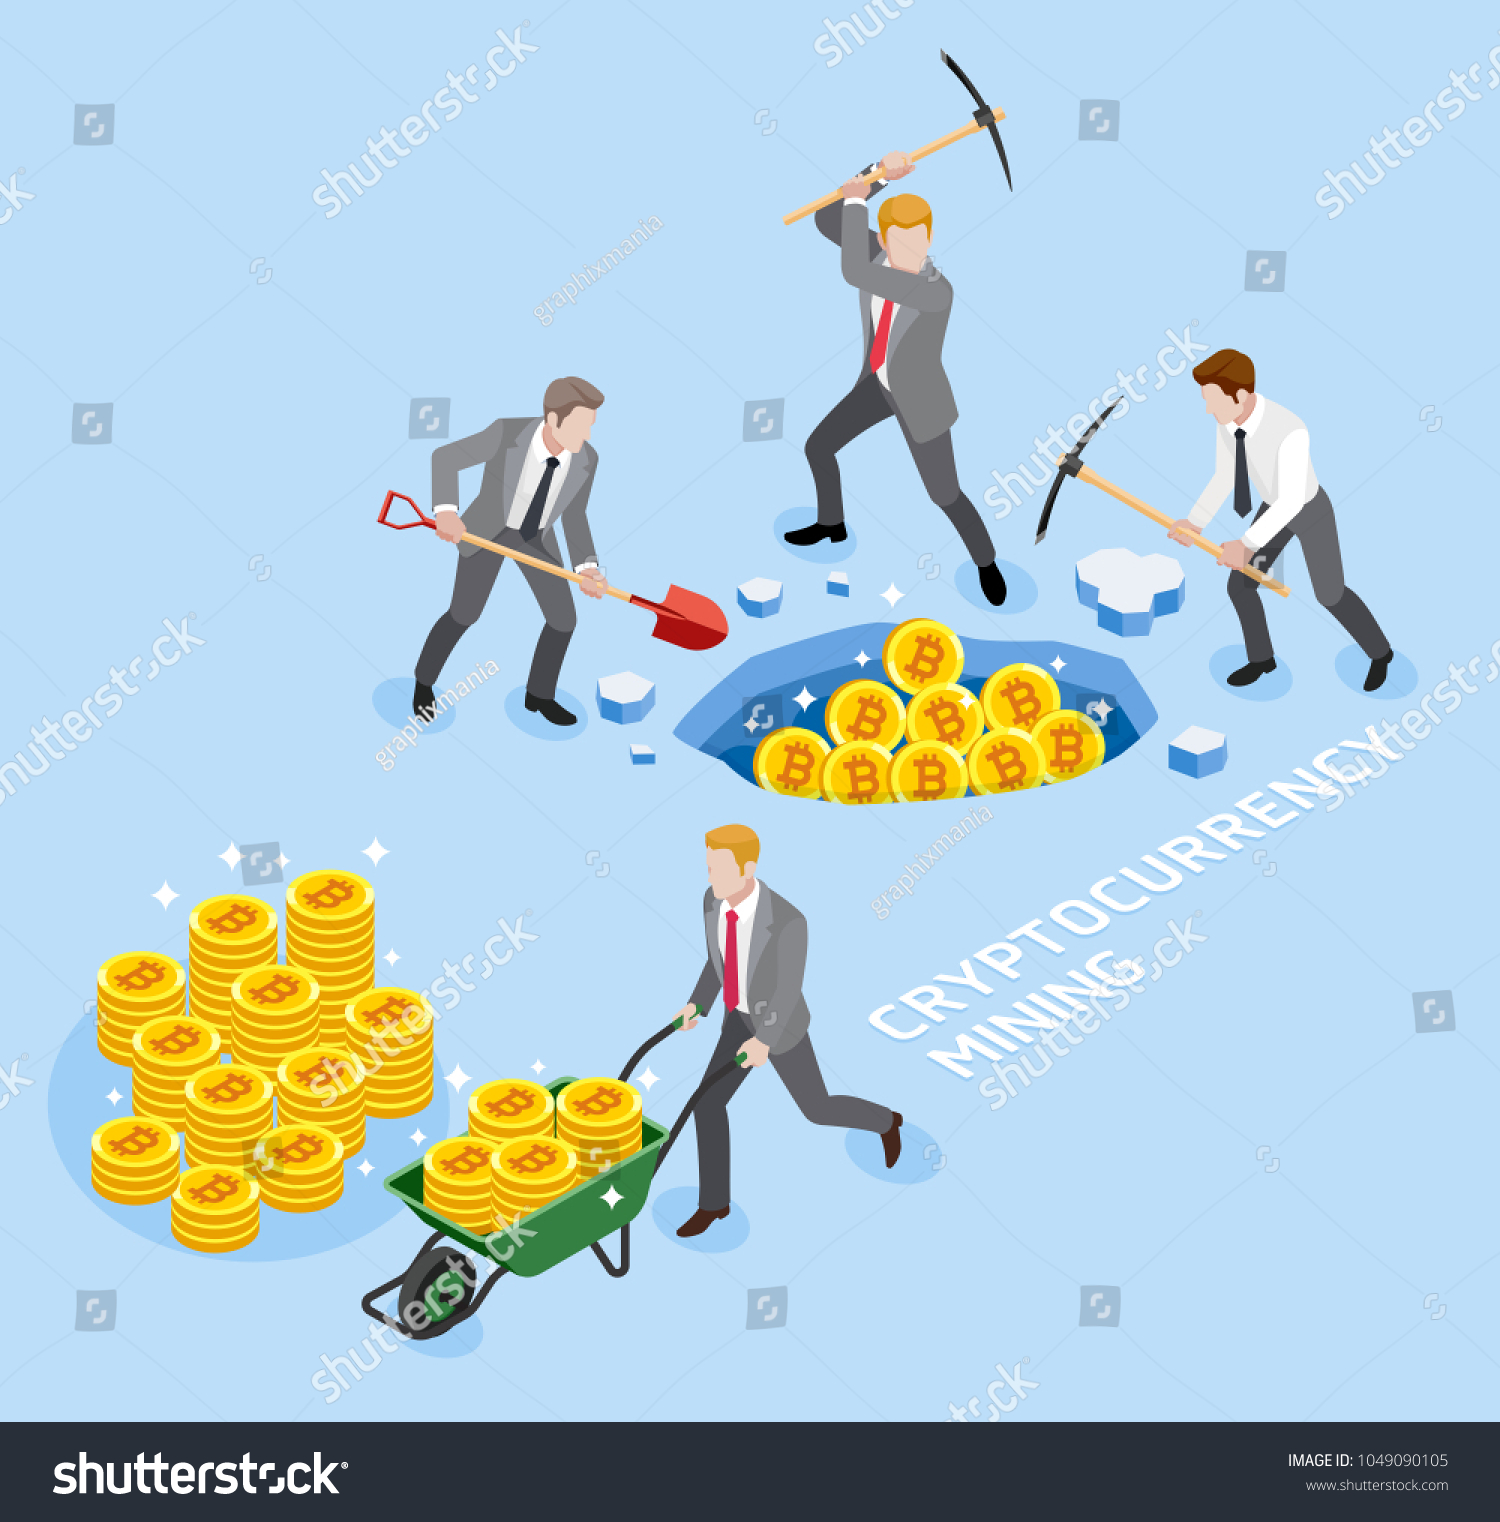 SVG of Bitcoin cryptocurrency mining concept. Group of business man use pickaxe working coin mine. Vector illustrations. svg